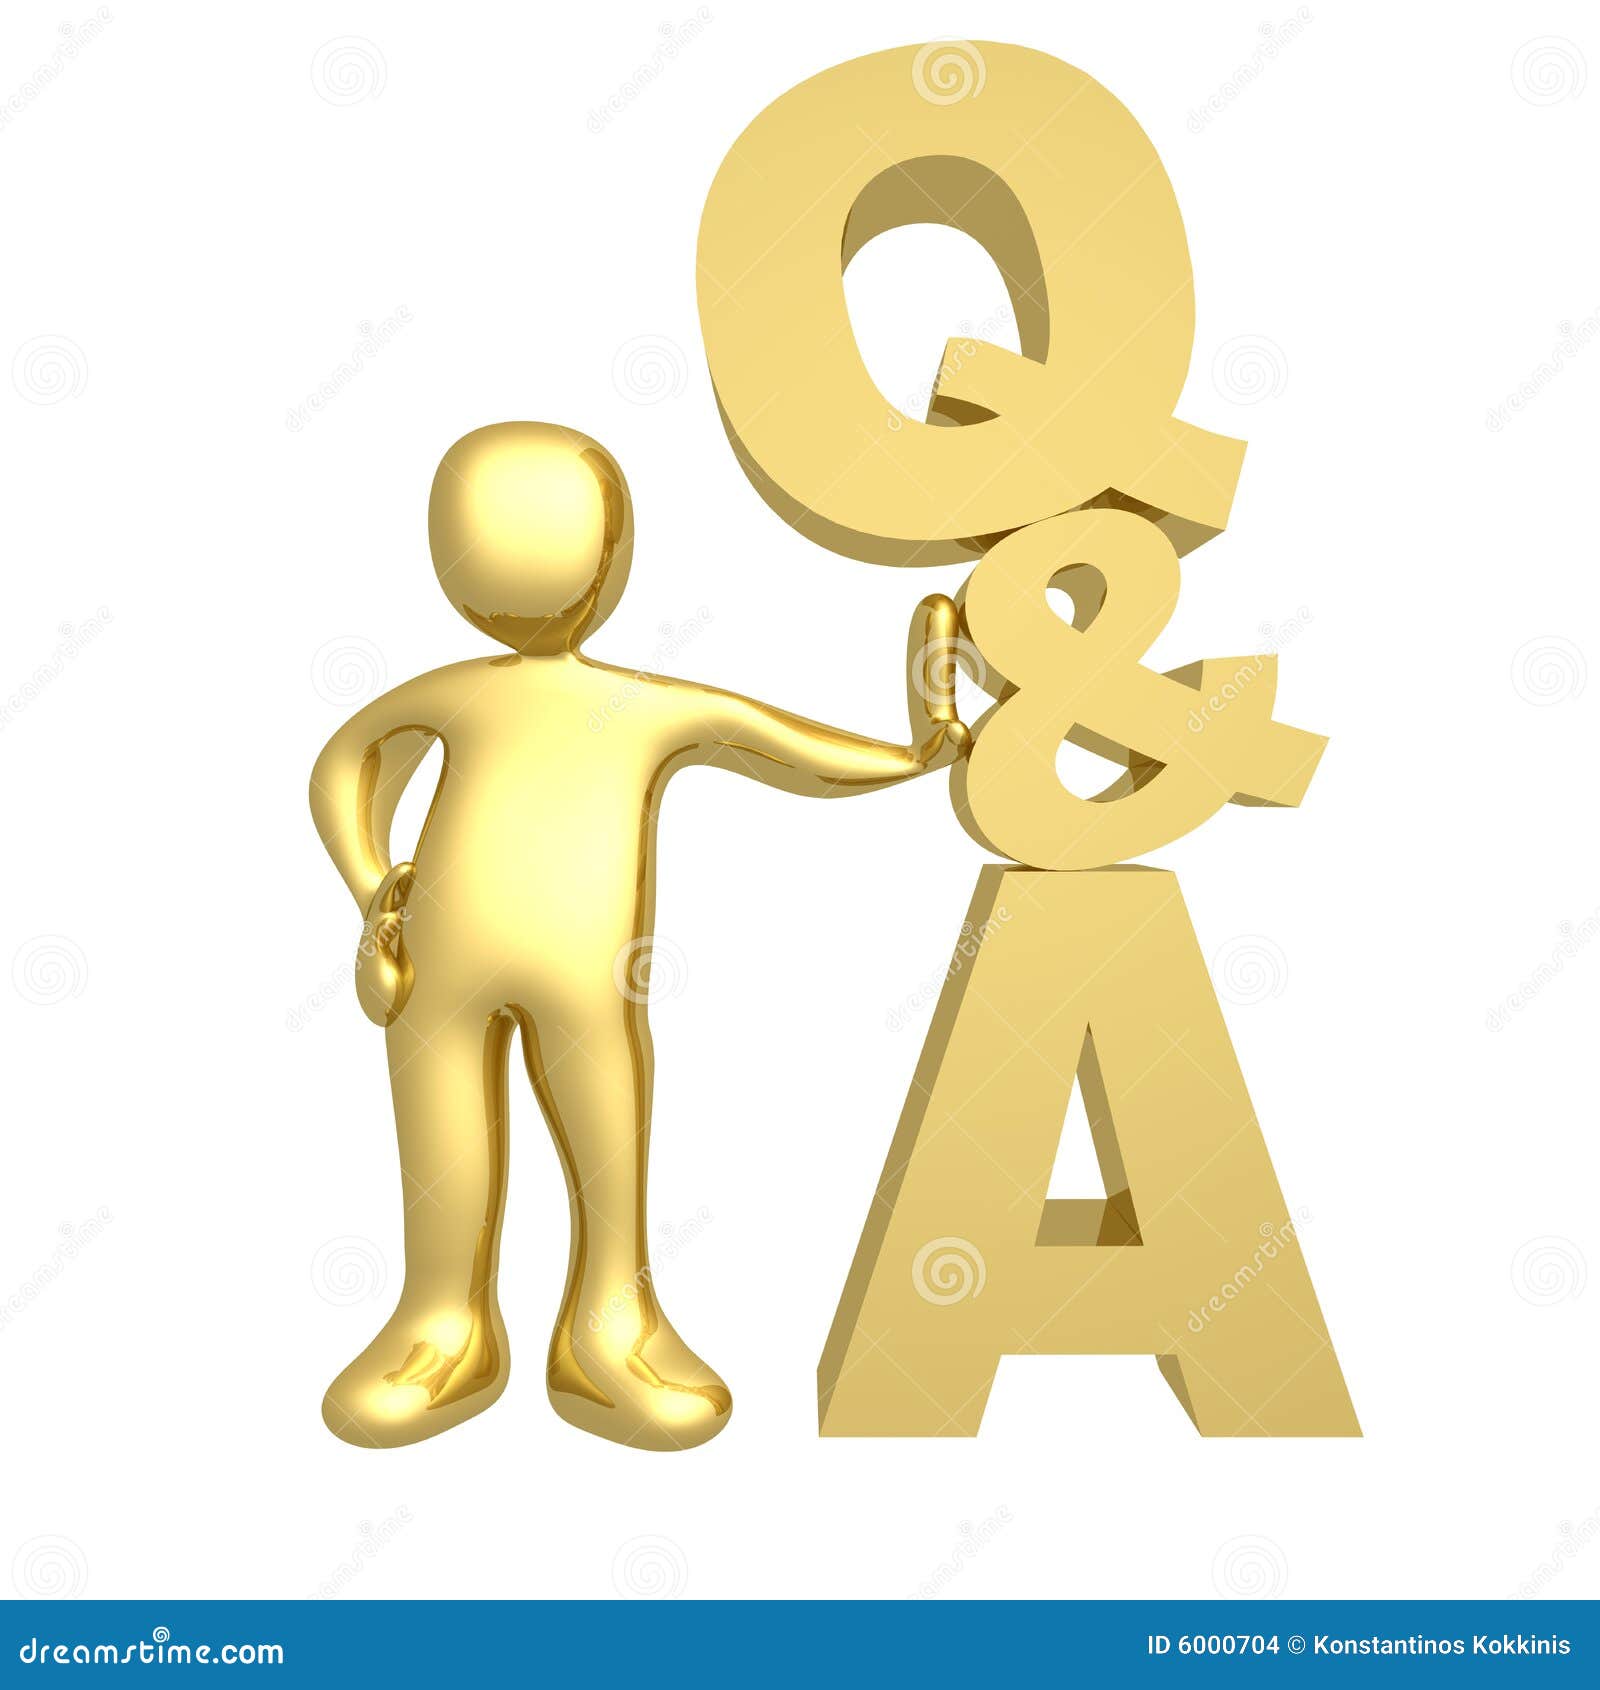 clipart question and answer - photo #12